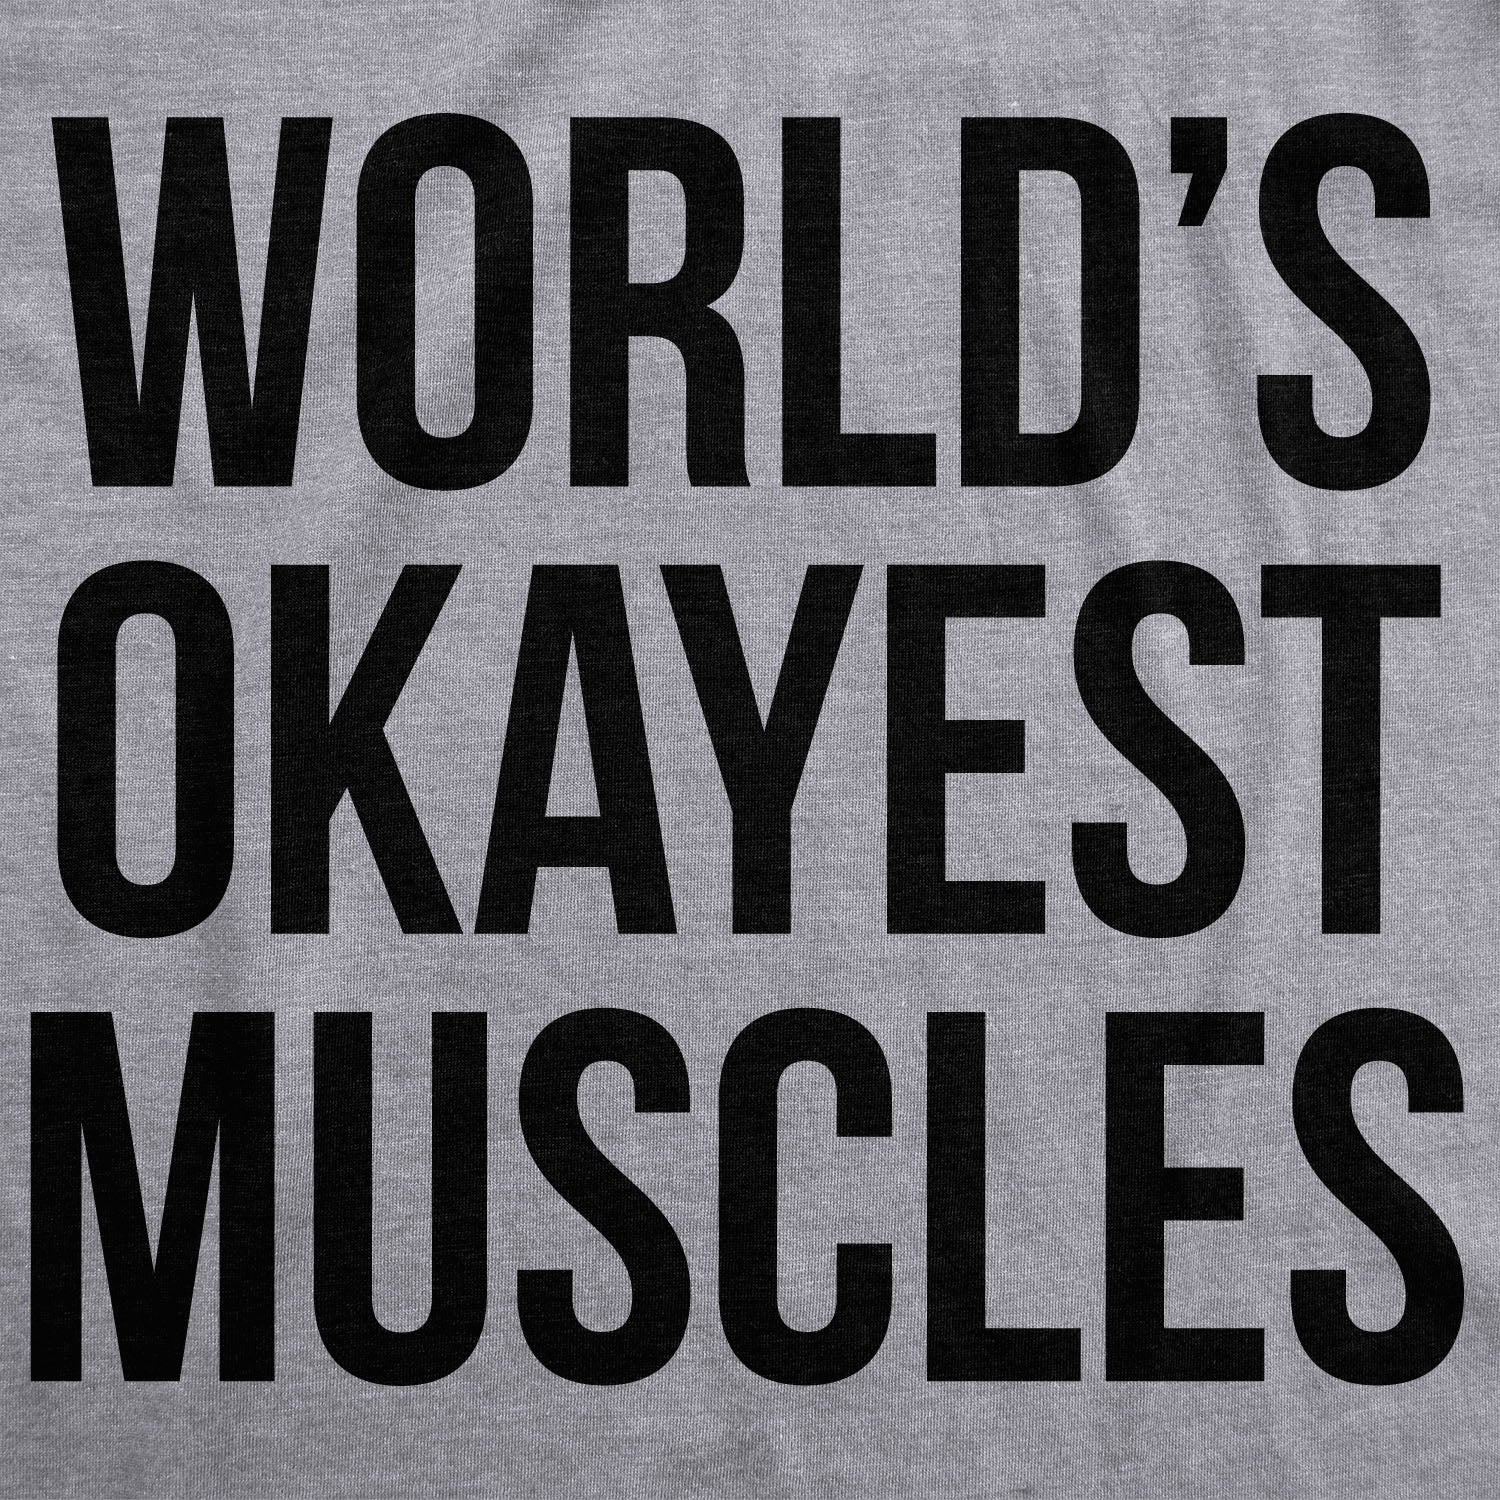 Funny Light Heather Grey World's Okayest Muscles Mens Tank Top Nerdy Fitness Okayest Tee